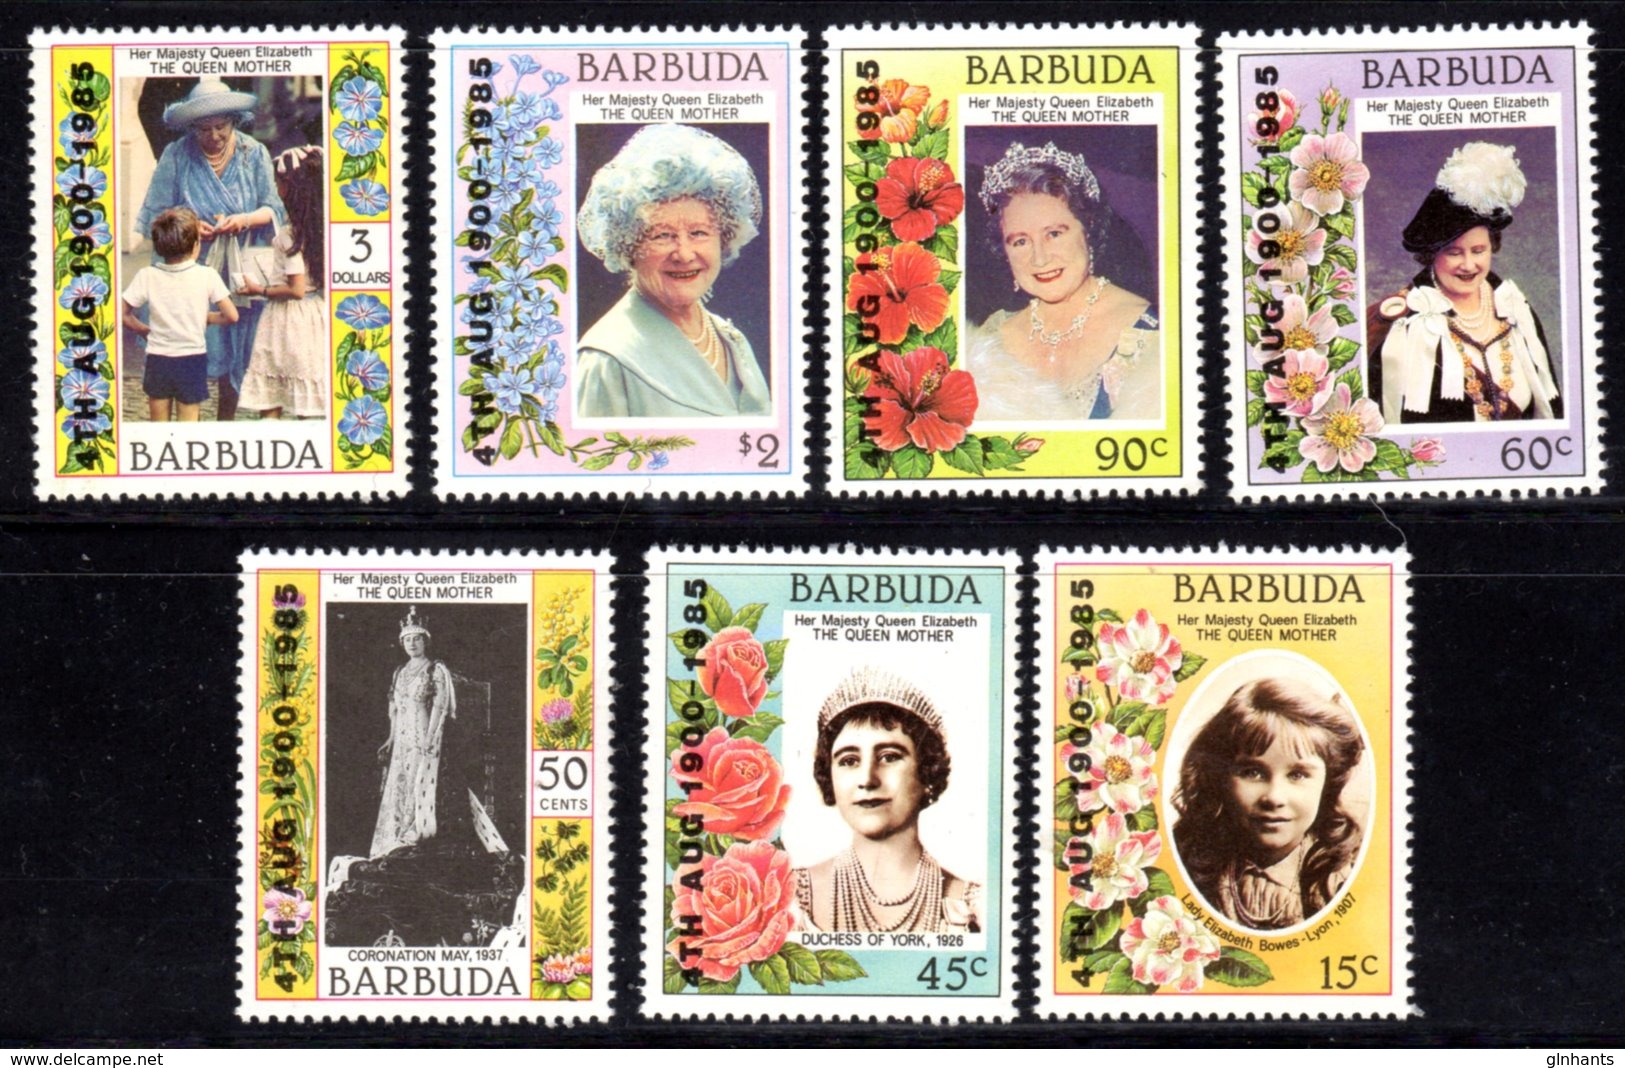 BARBUDA - 1985 LIFE & TIMES OF QUEEN ELIZABETH THE QUEEN MOTHER SET (7V) FINE MNH ** WITH DATE O/P SG 809-815 - Antigua And Barbuda (1981-...)